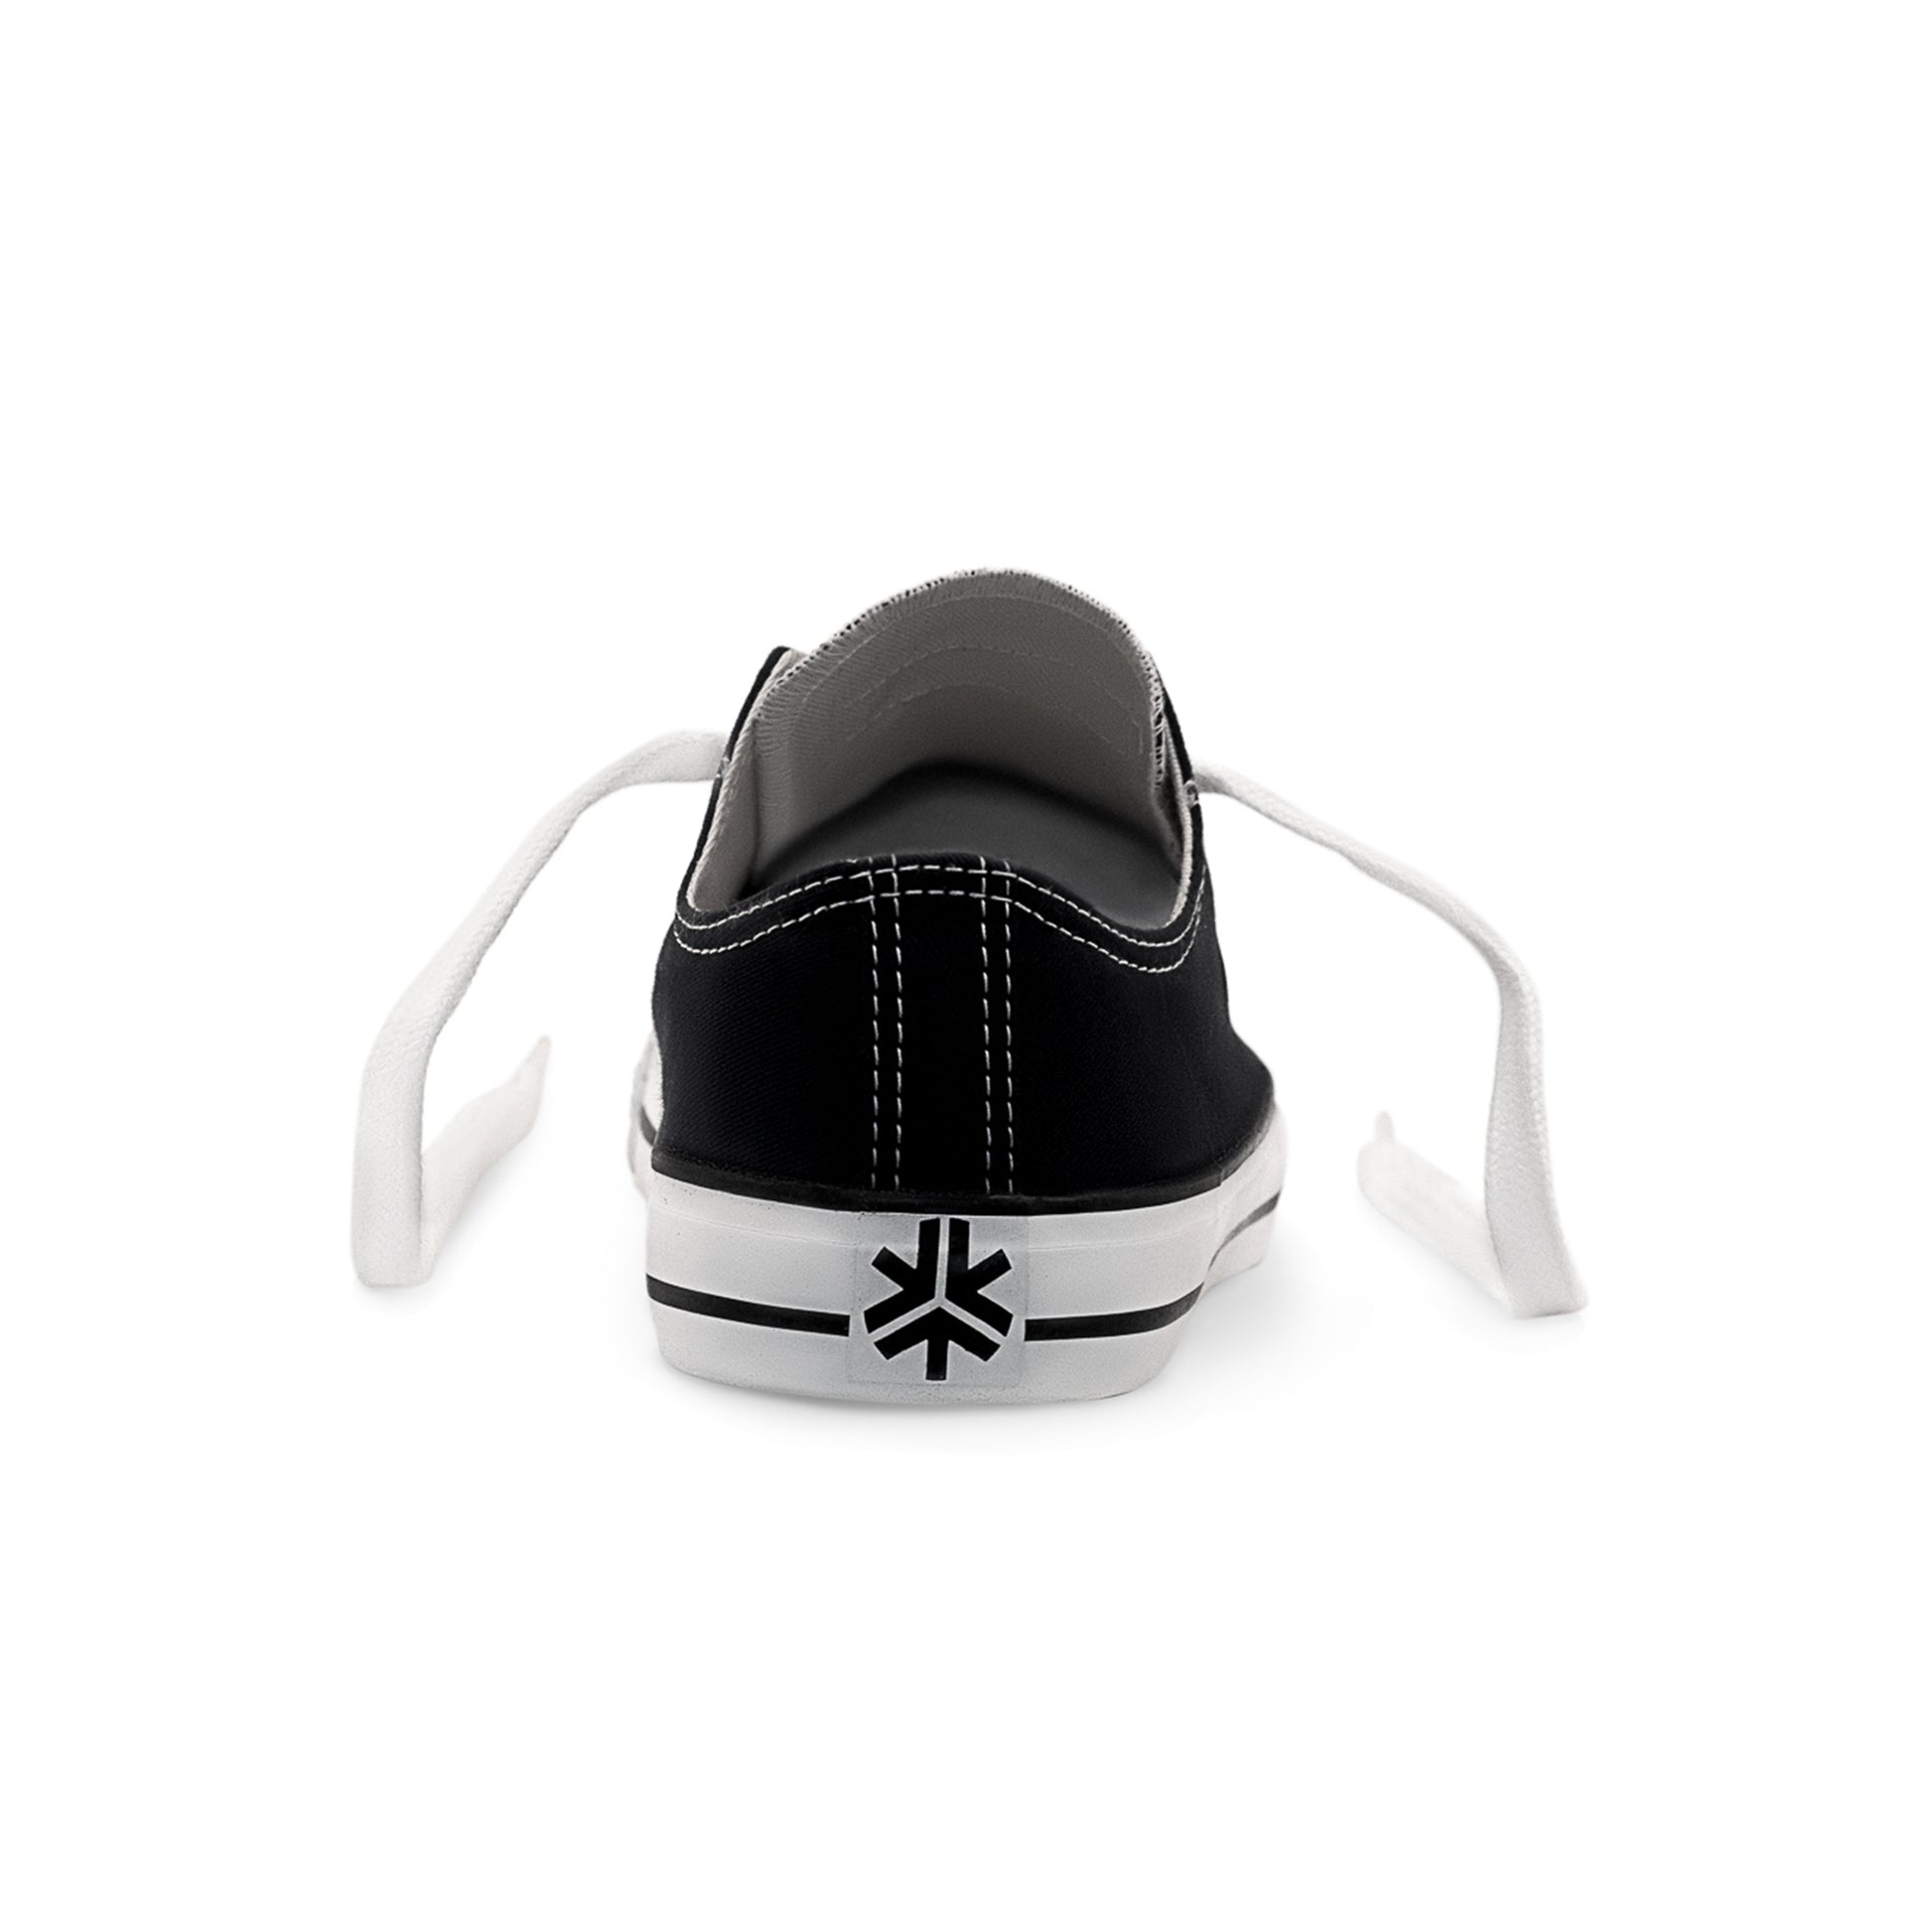 Etiko Vegan Low Cut Black and White Sneakers Organic and Fairtrade Certified Ethical Sneakers